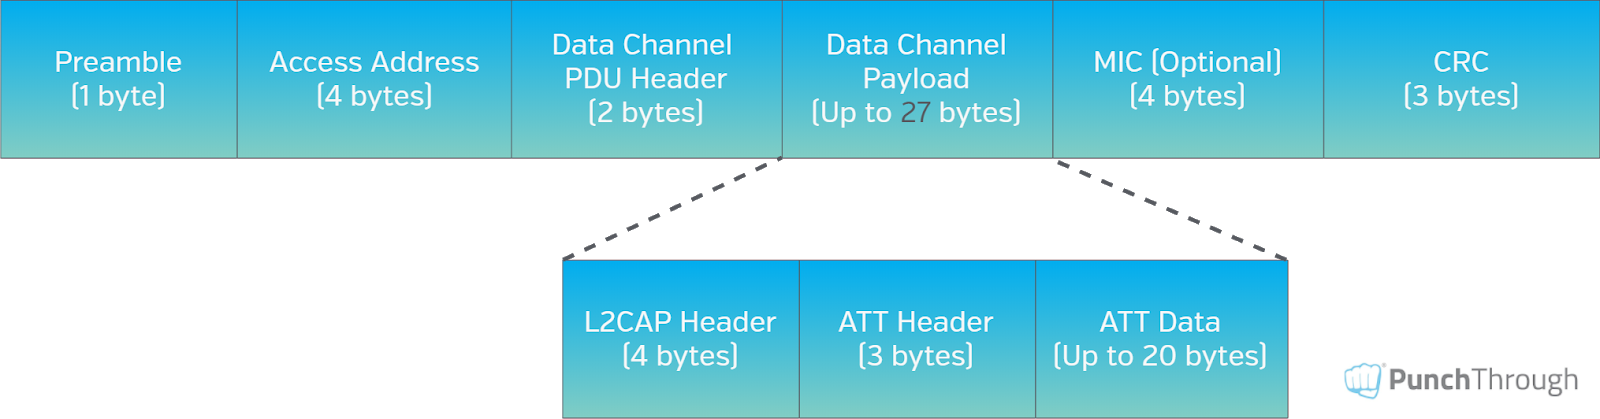 Bluetooth 4.04.1 link layer packet structure without DLE